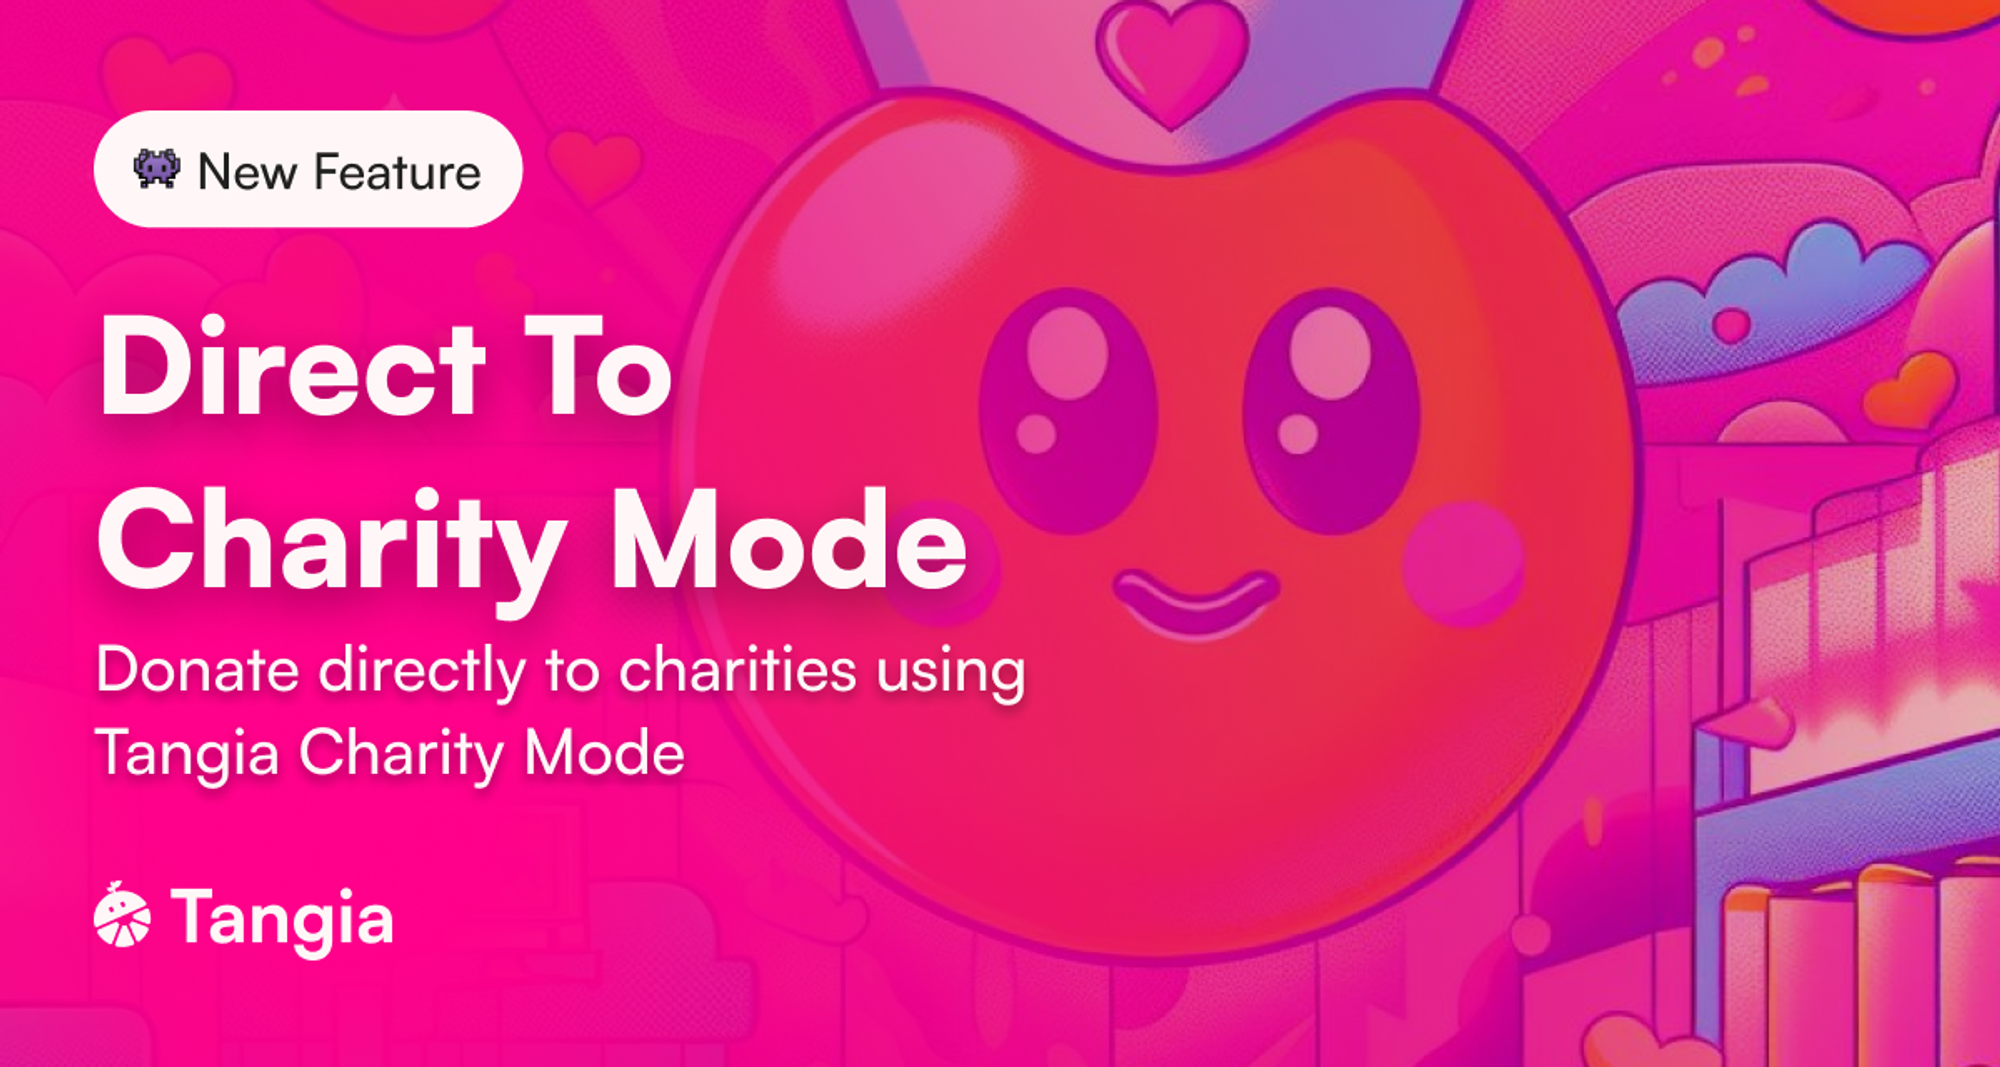 Direct to Charity Mode